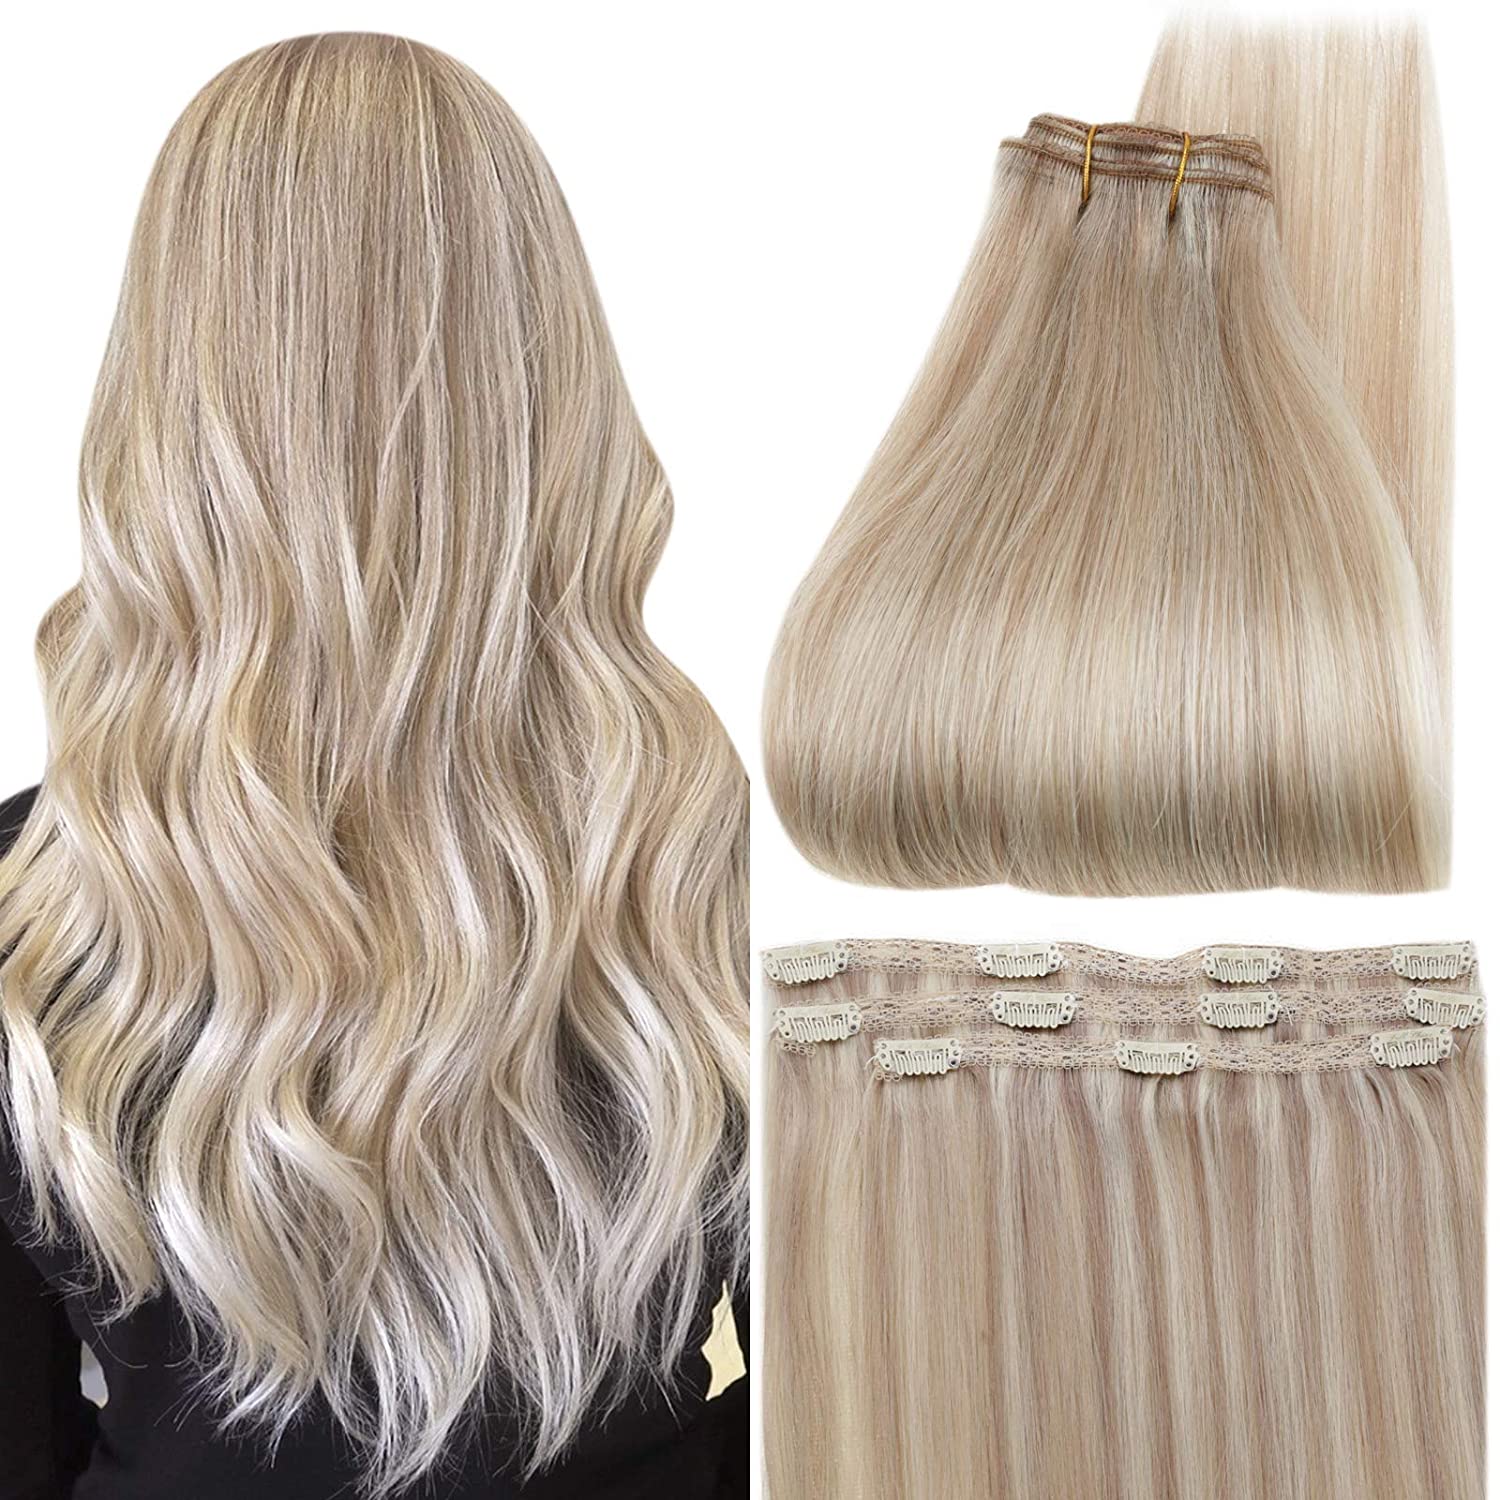 FShine Lace Clip In Hair Extensions Clip in Hair Extensions #18P613 - FShine Shop